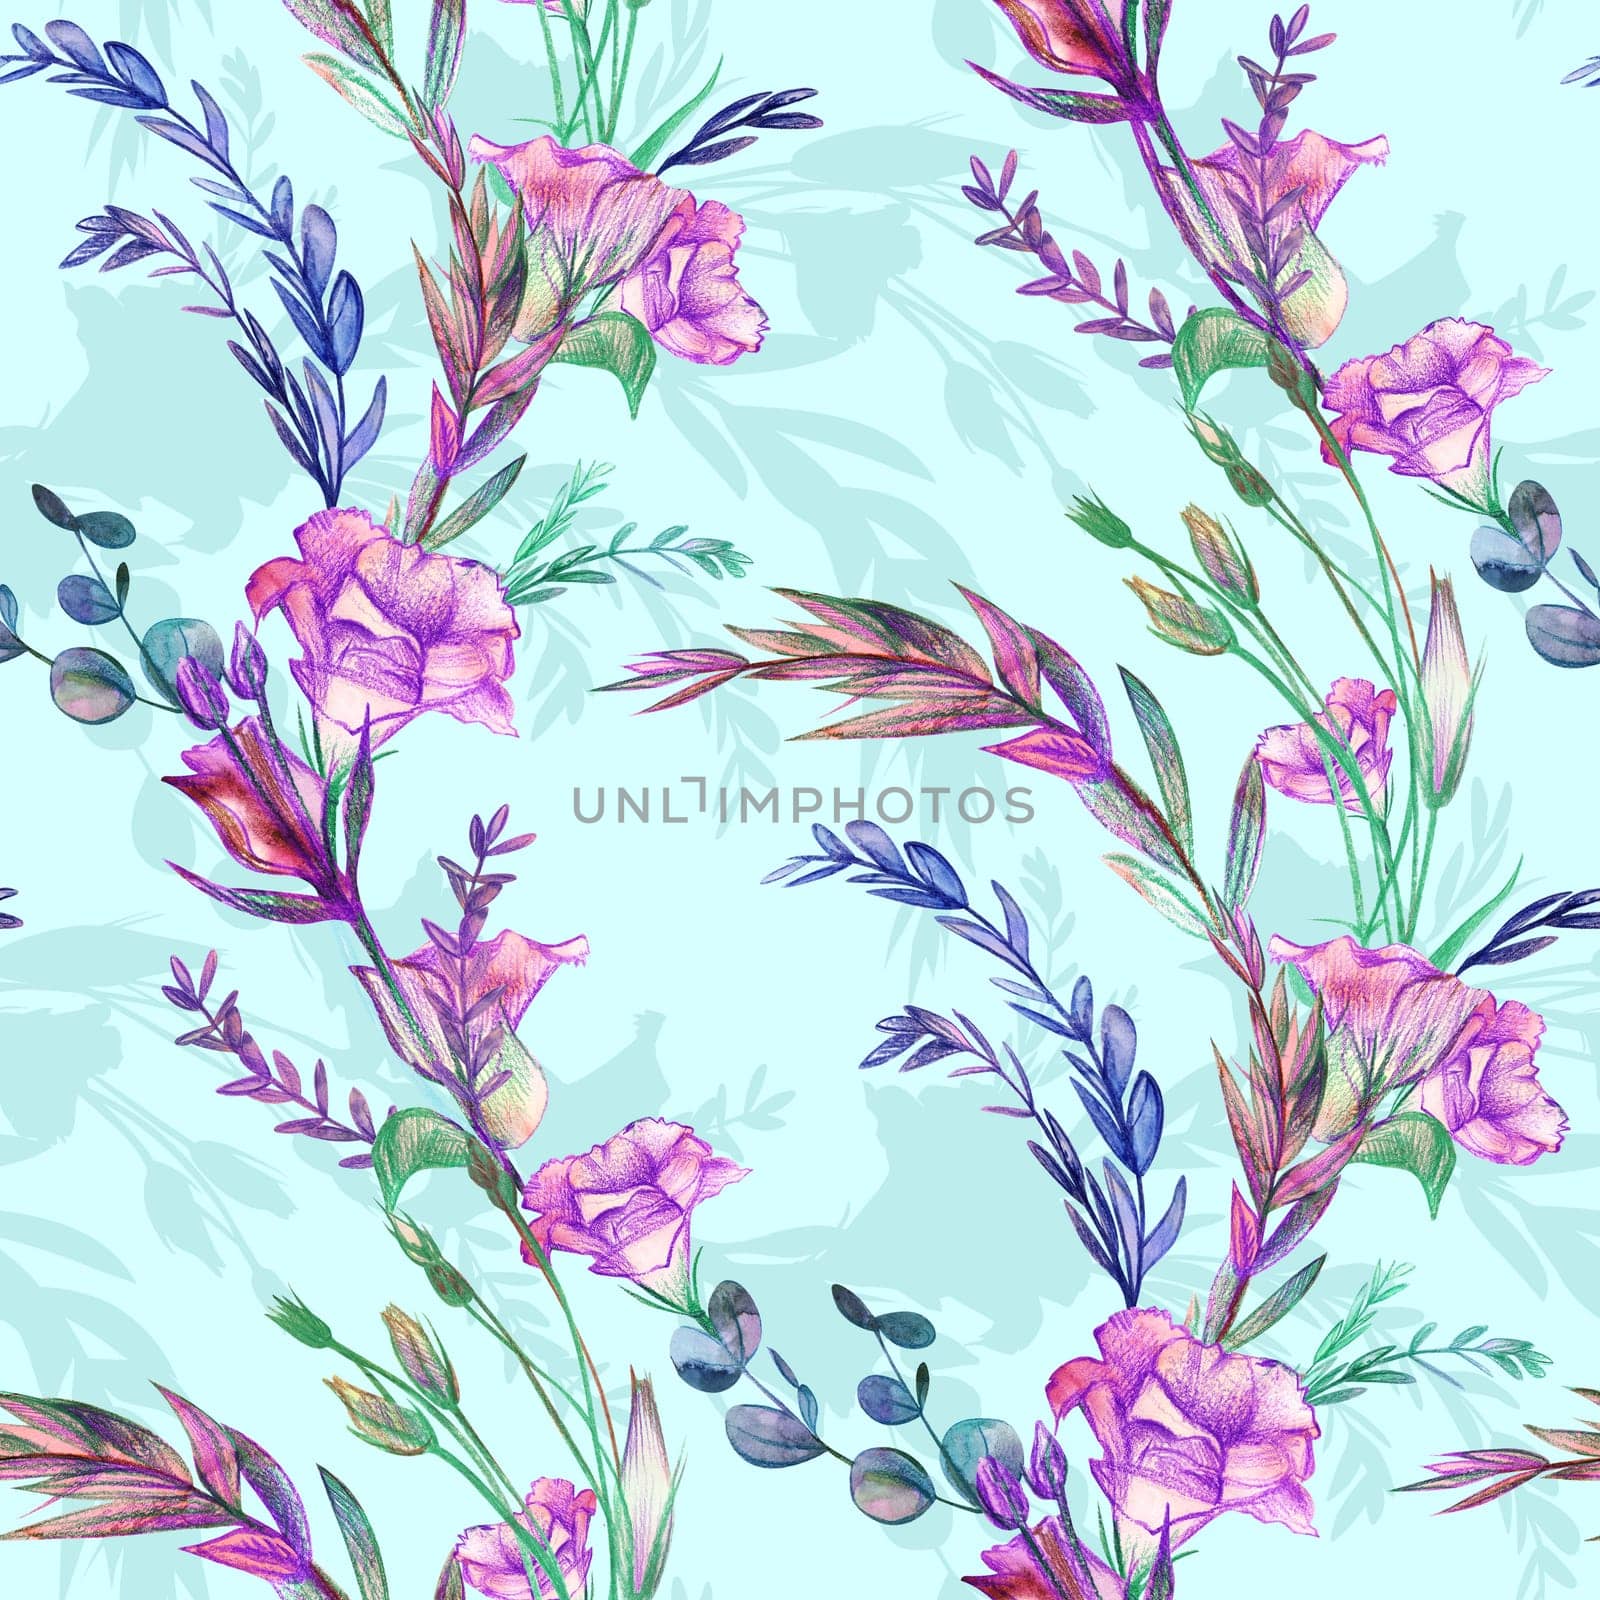 Eustoma twigs drawn with watercolors and pencils. Seamless botanical pattern with purple flowers in vintage style on turquoise backdrop for girlish textiles and surface design